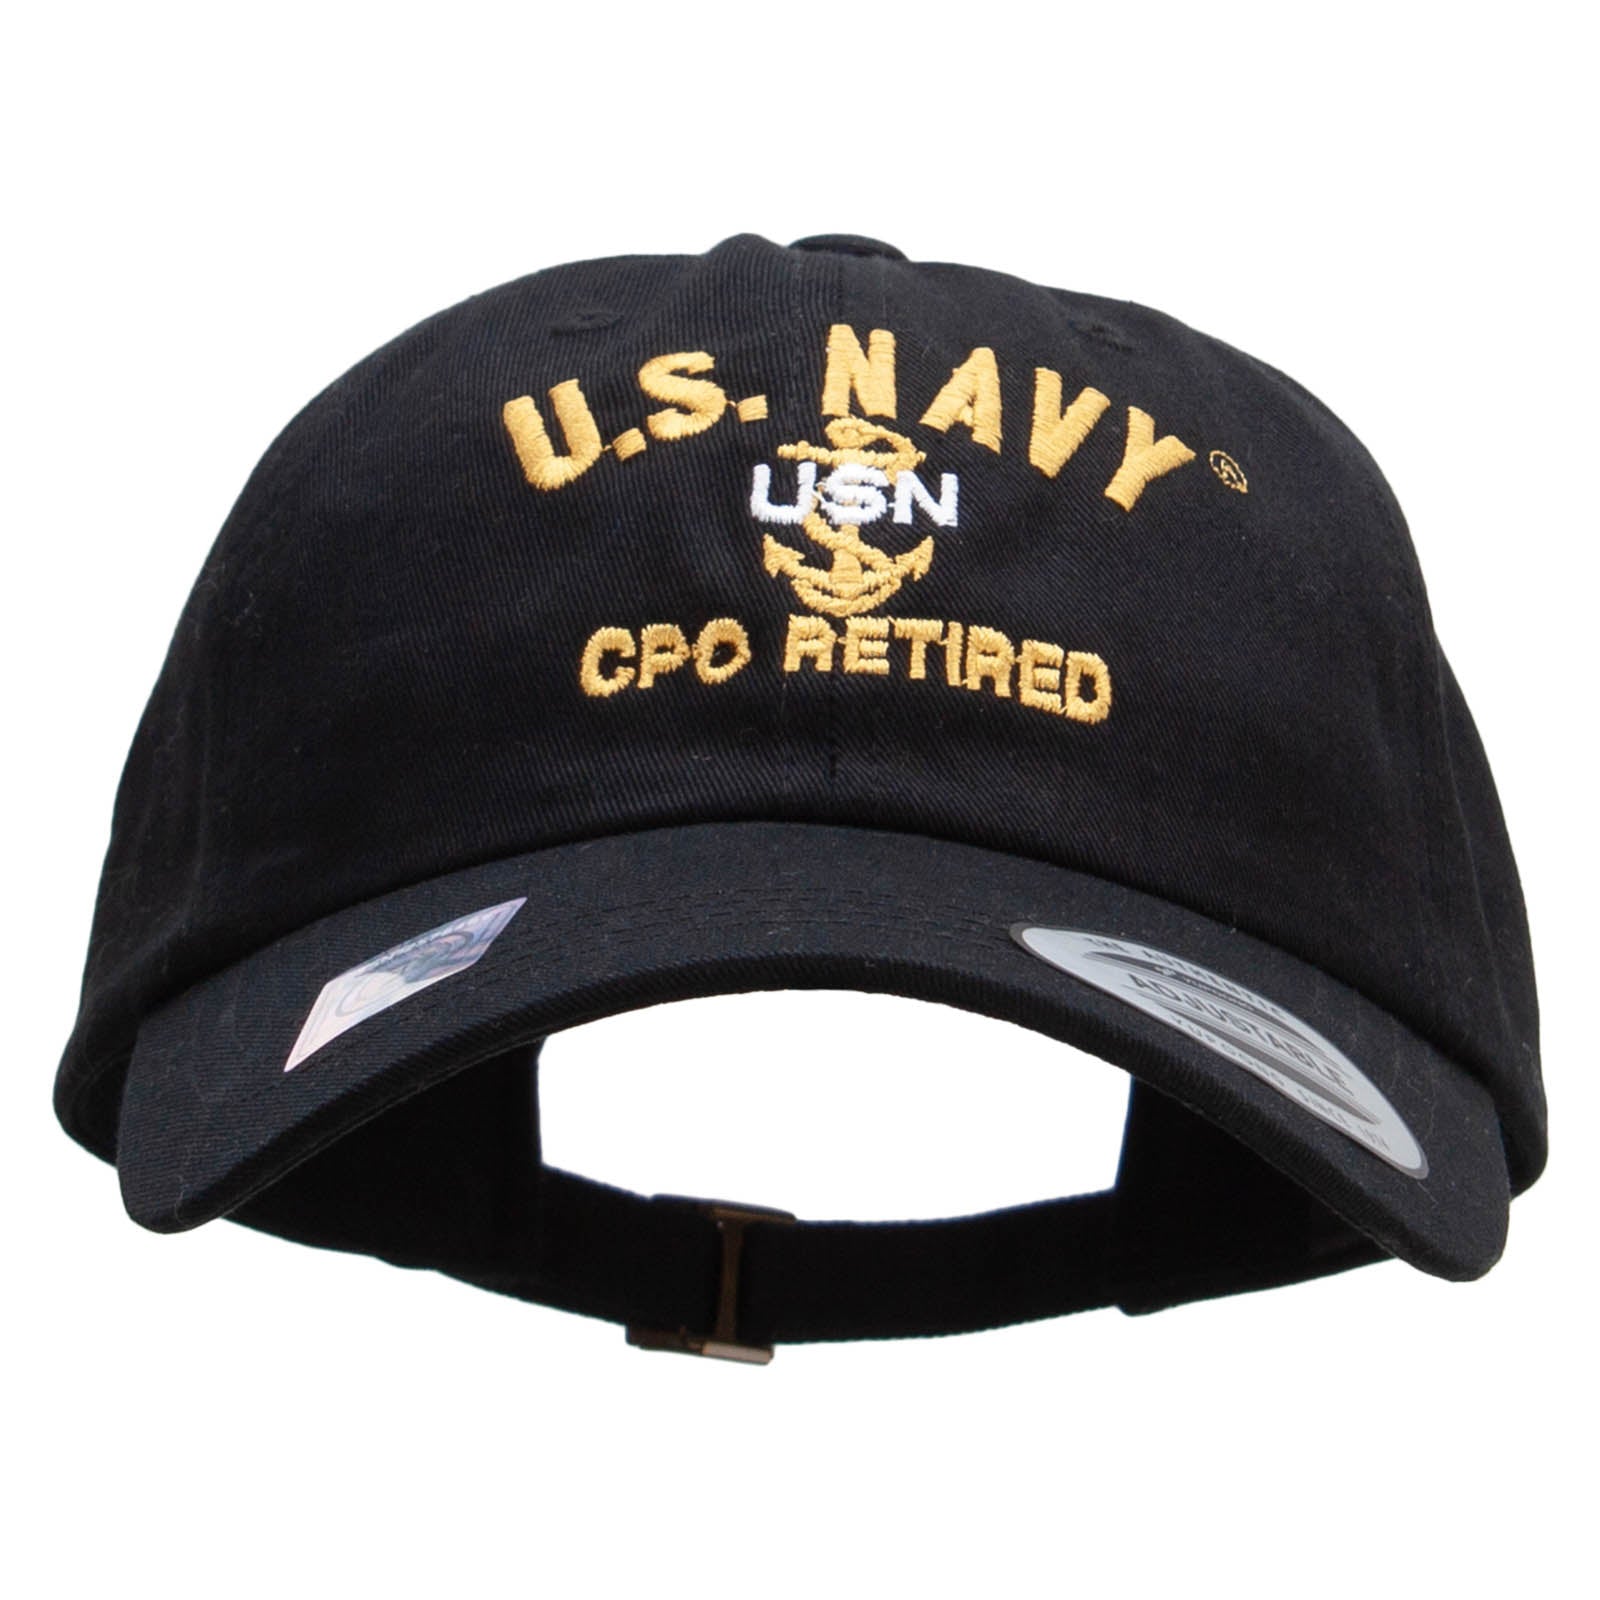 Licensed US Navy USN CPO Retired Unstructured Low Profile 6 panel Cotton Cap - Black OSFM